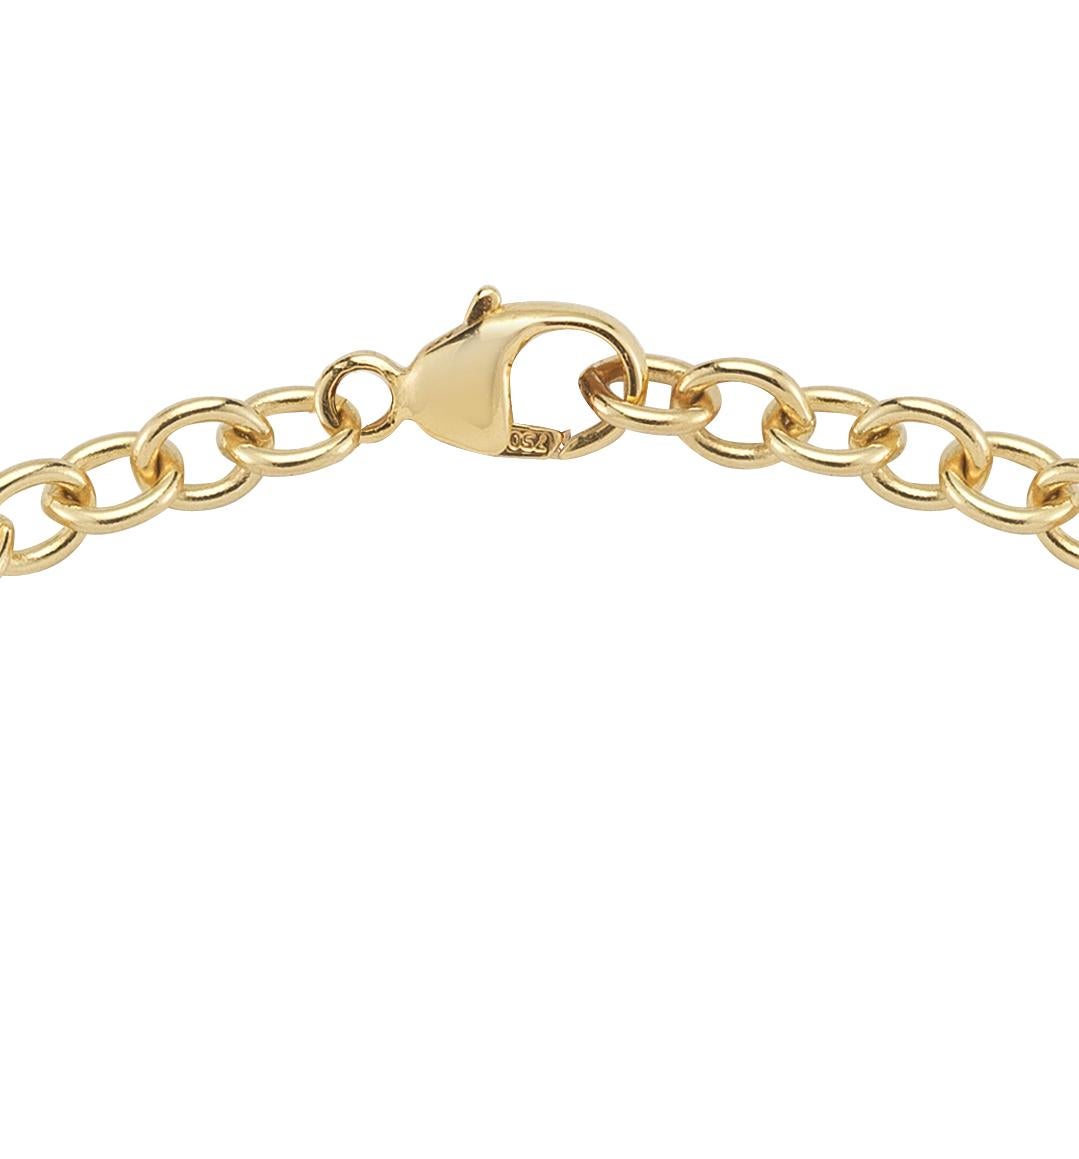 Gold bracelet hand set with rubies. The setting is painted with black rhodium which makes the rubies really glow.

18k yellow gold 
0.30 cts of rubies 
6